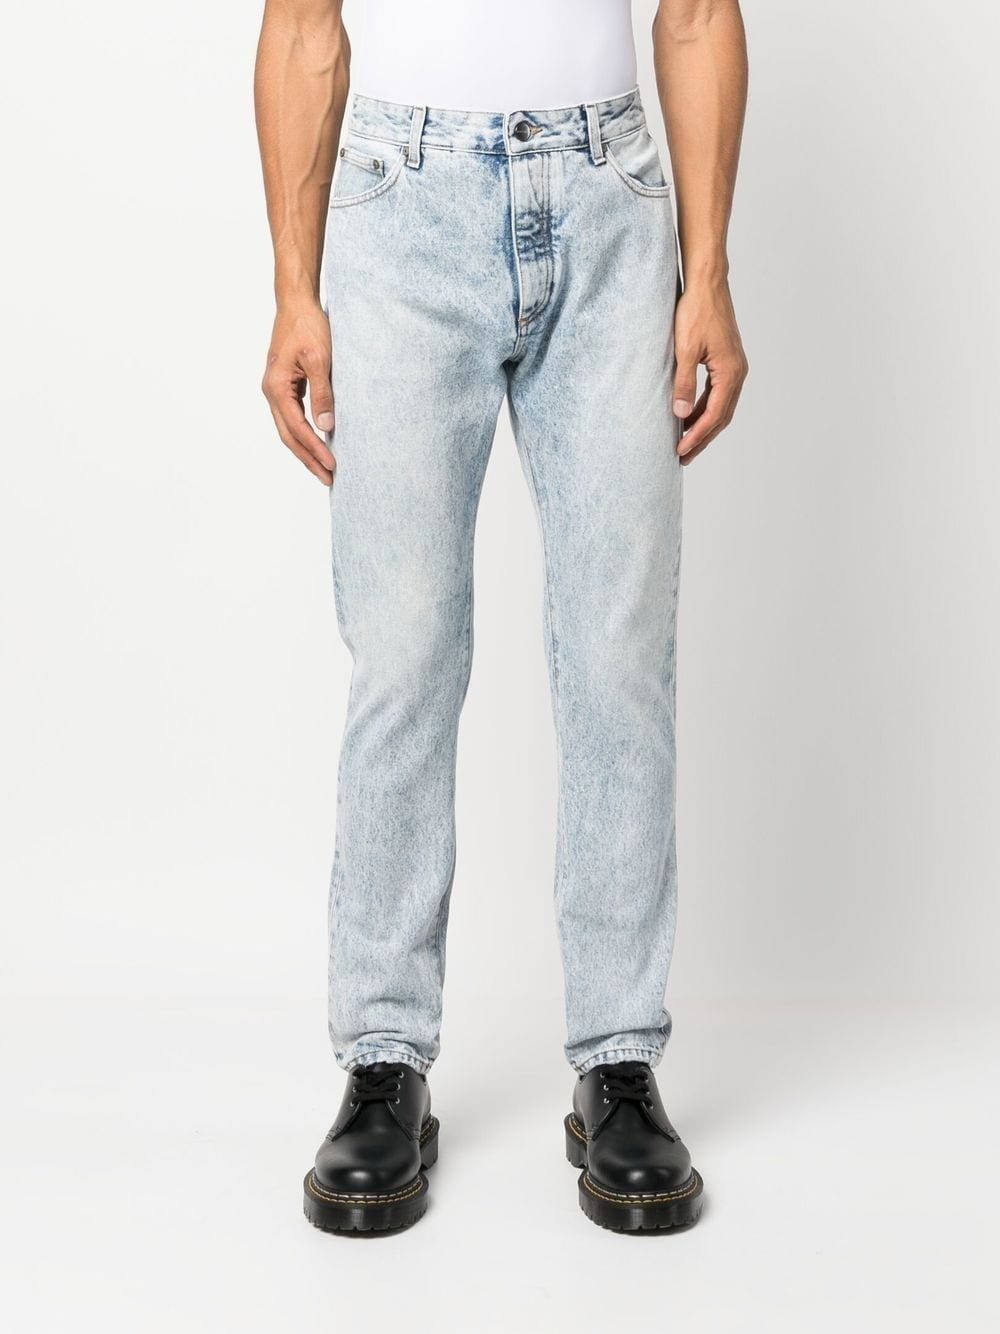 Curvedlogo Wash Denim Pants in blue - Palm Angels® Official